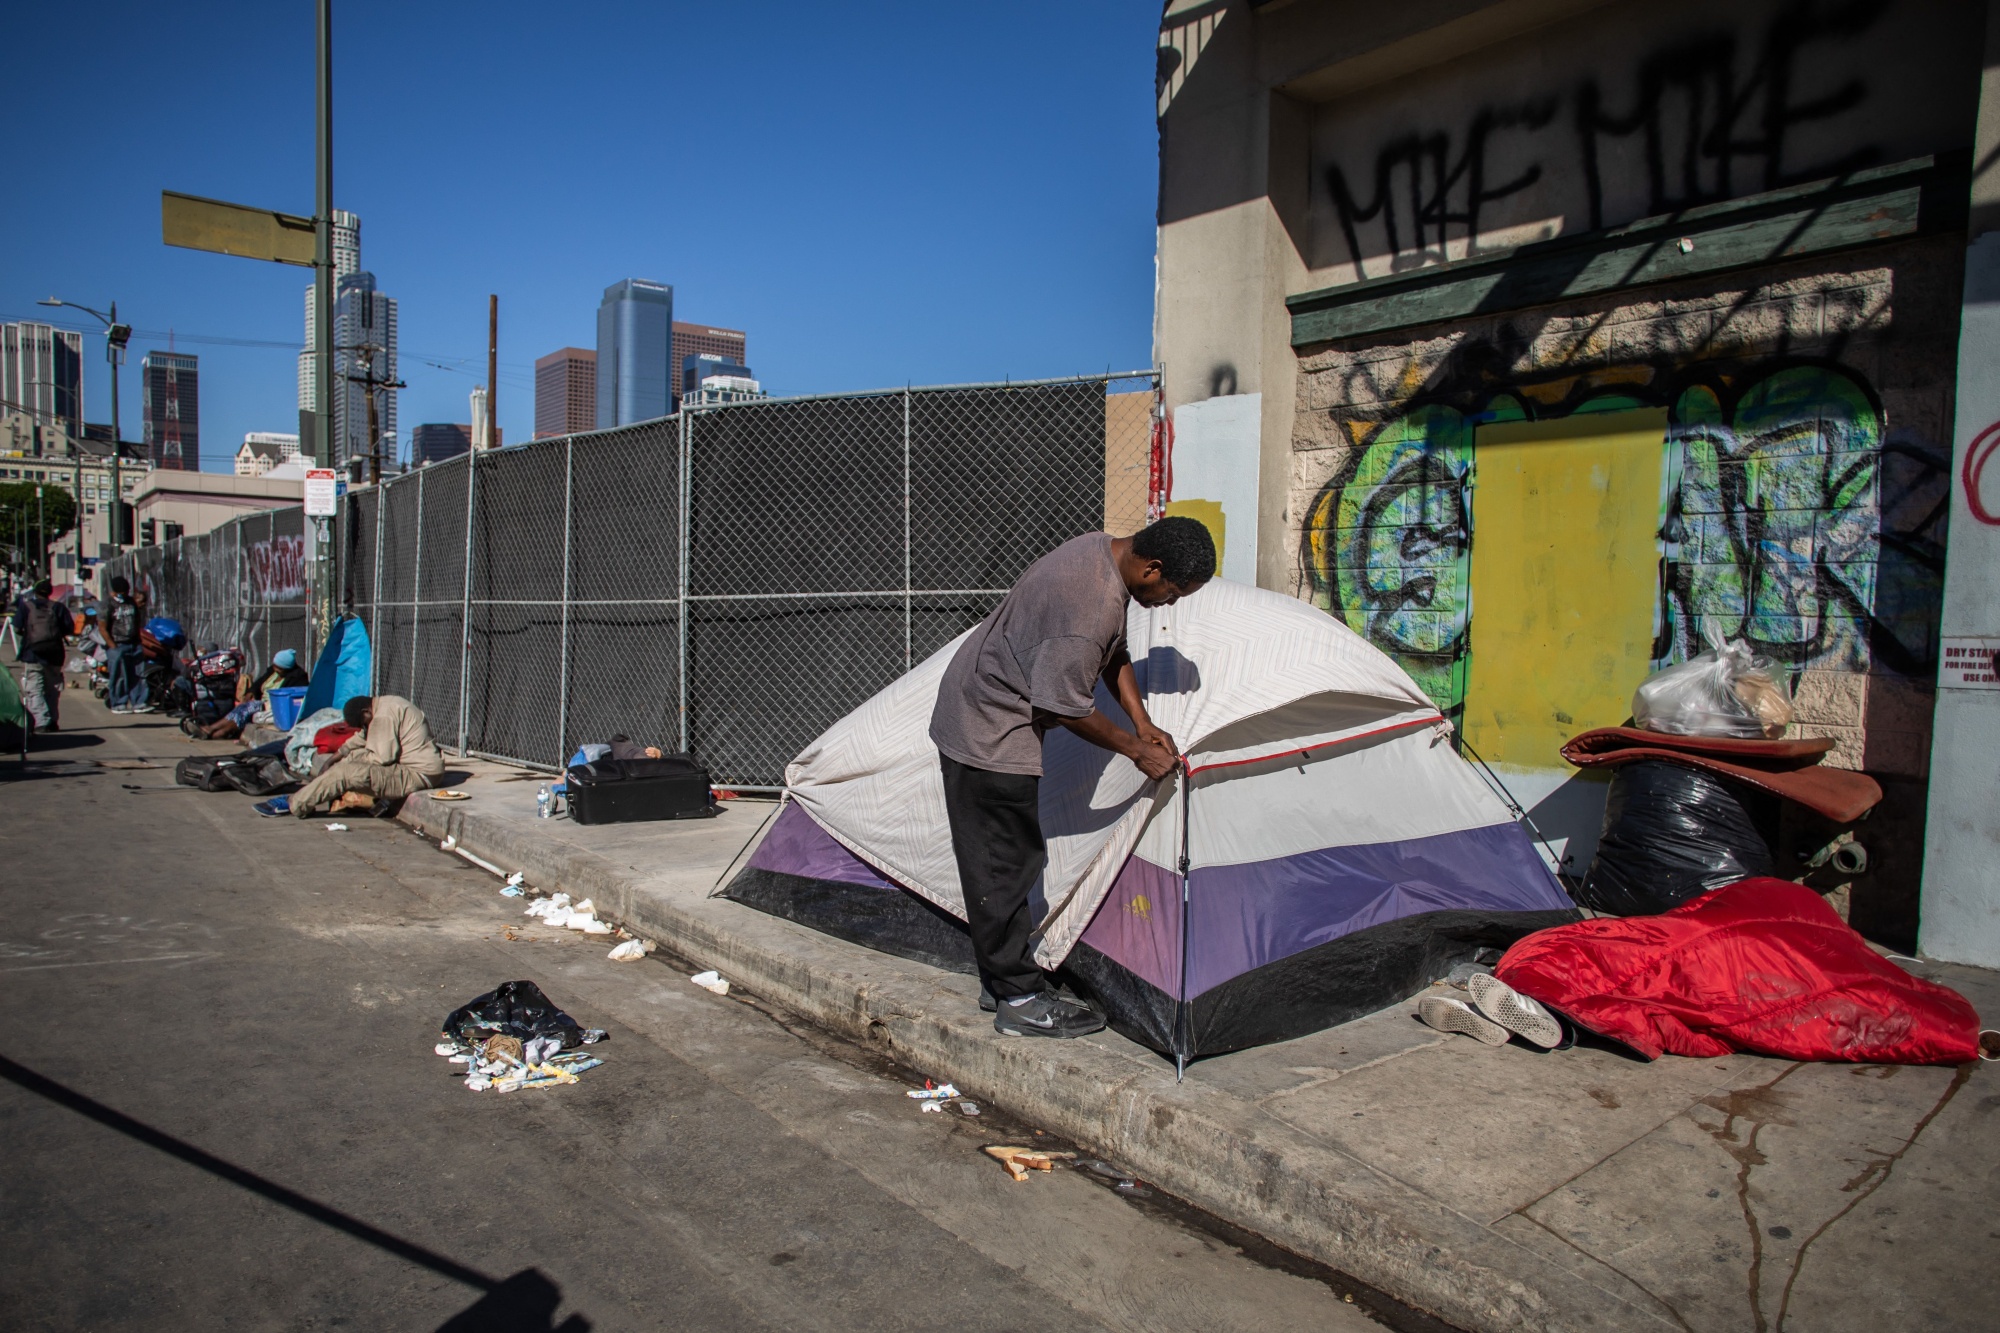 LA Paying 600,000 Apiece for Units to House Homeless People Bloomberg